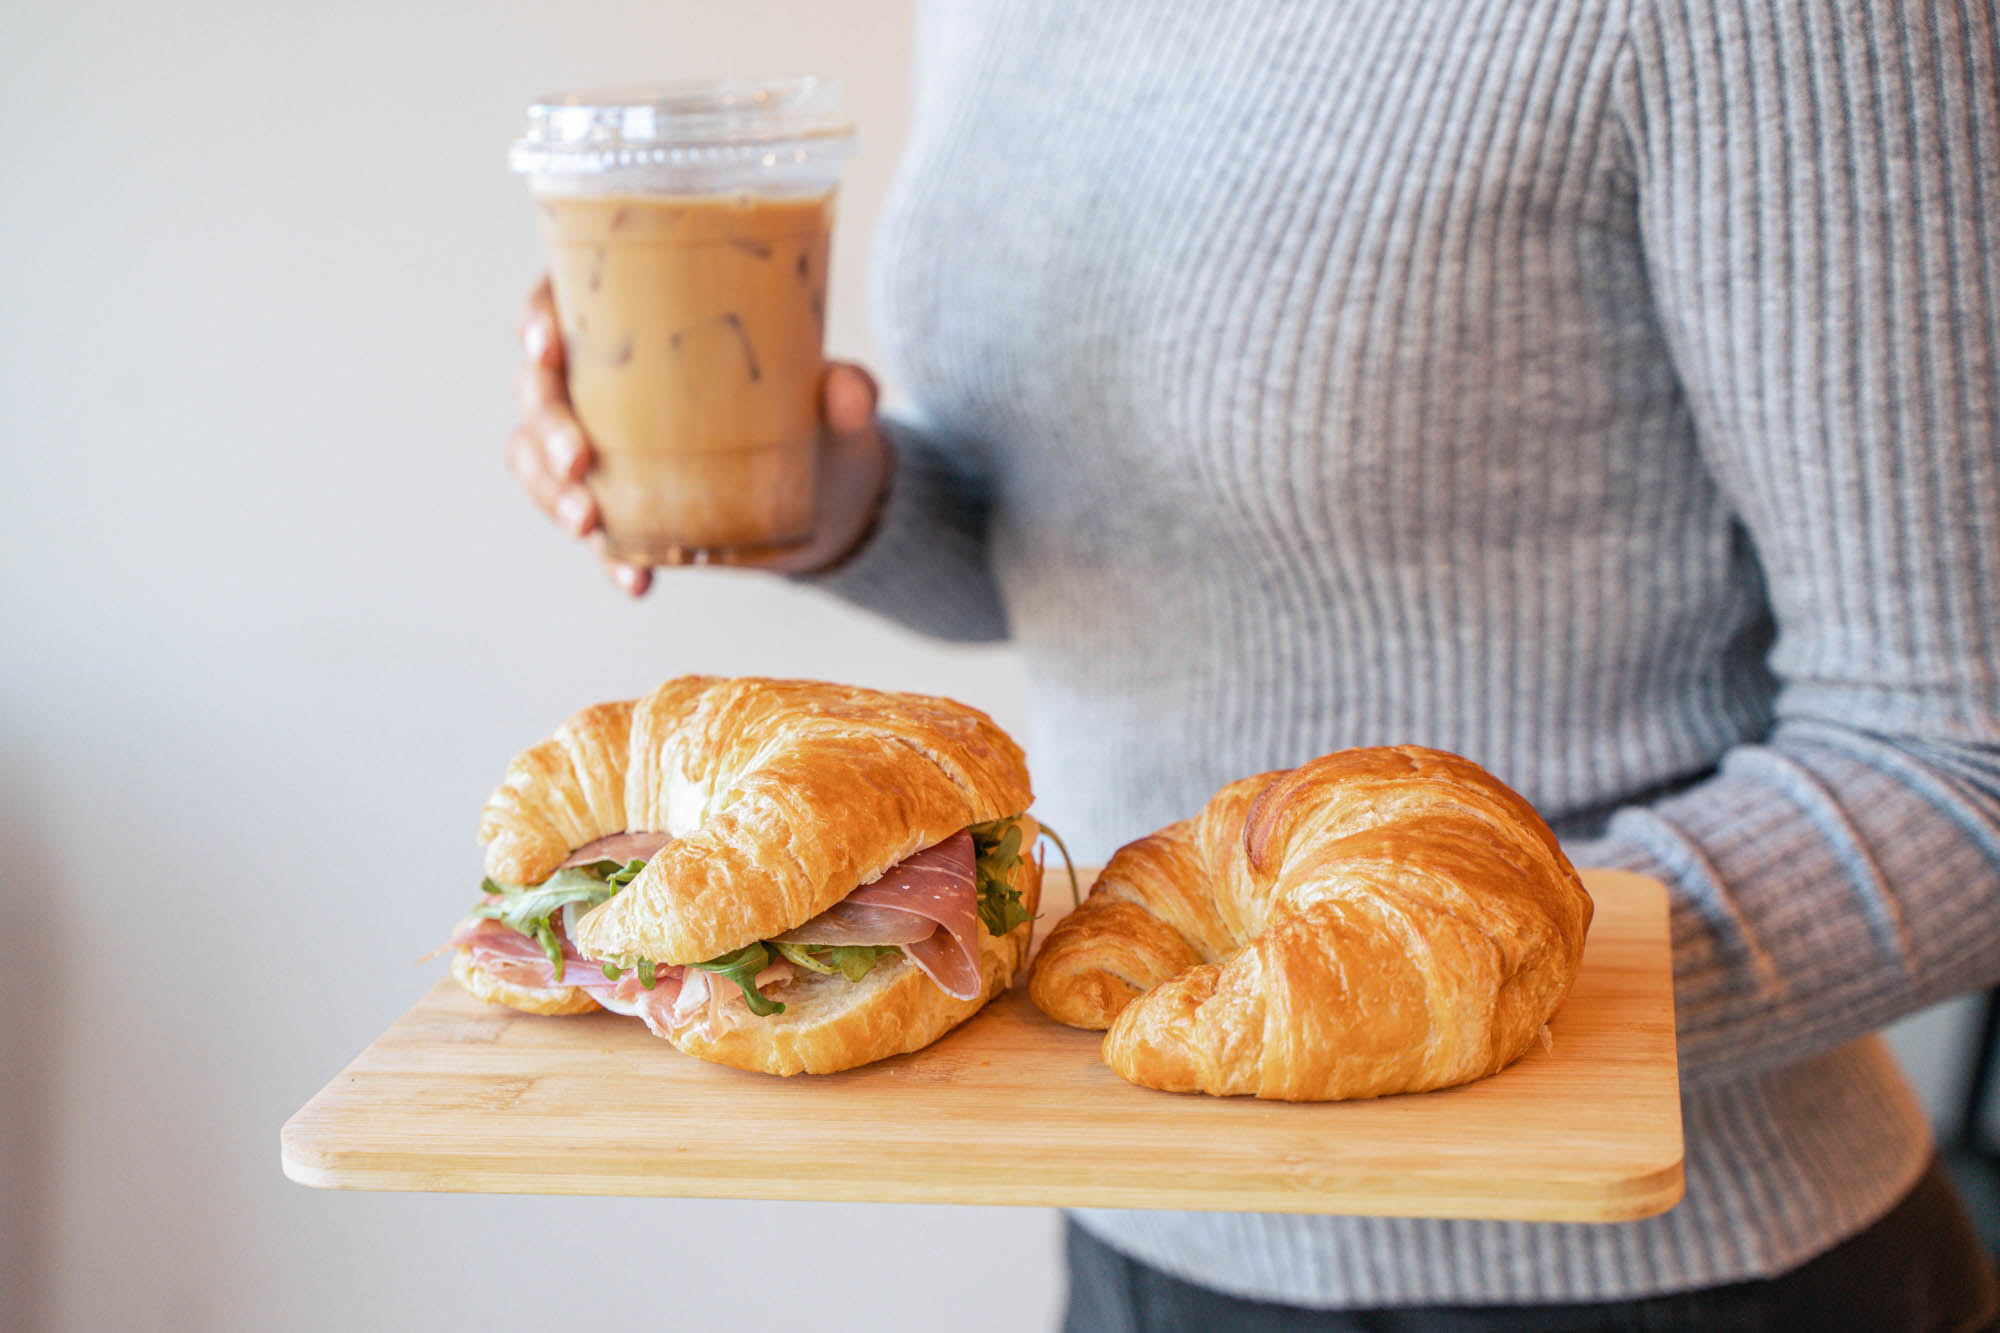 Croissant sandwich and ice coffee